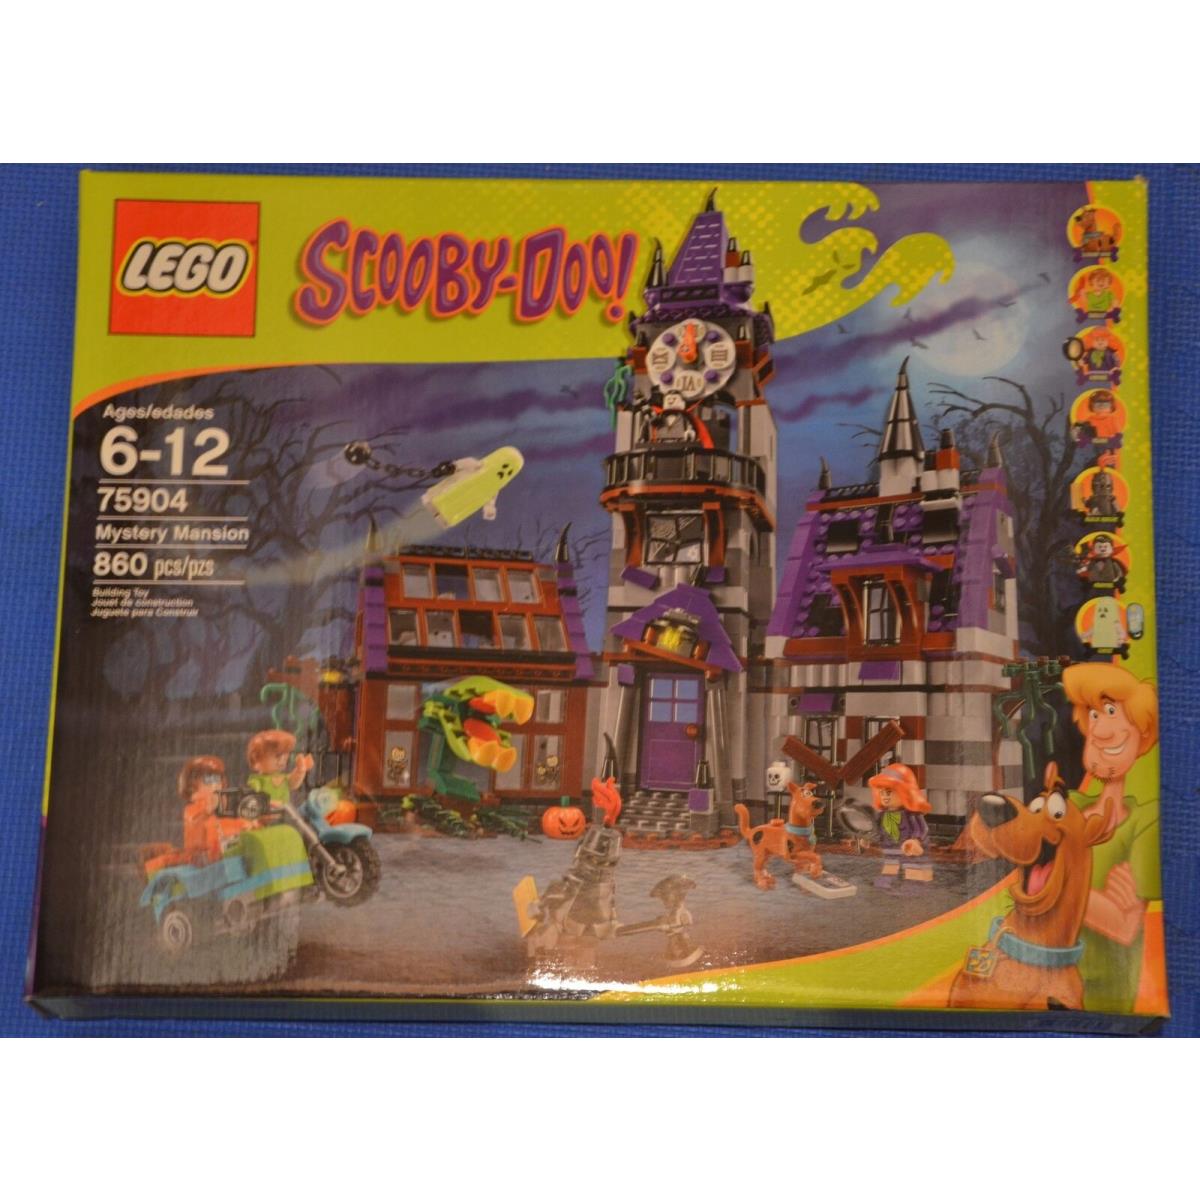 Lego 75904 Scooby-doo Mystery Mansion Set